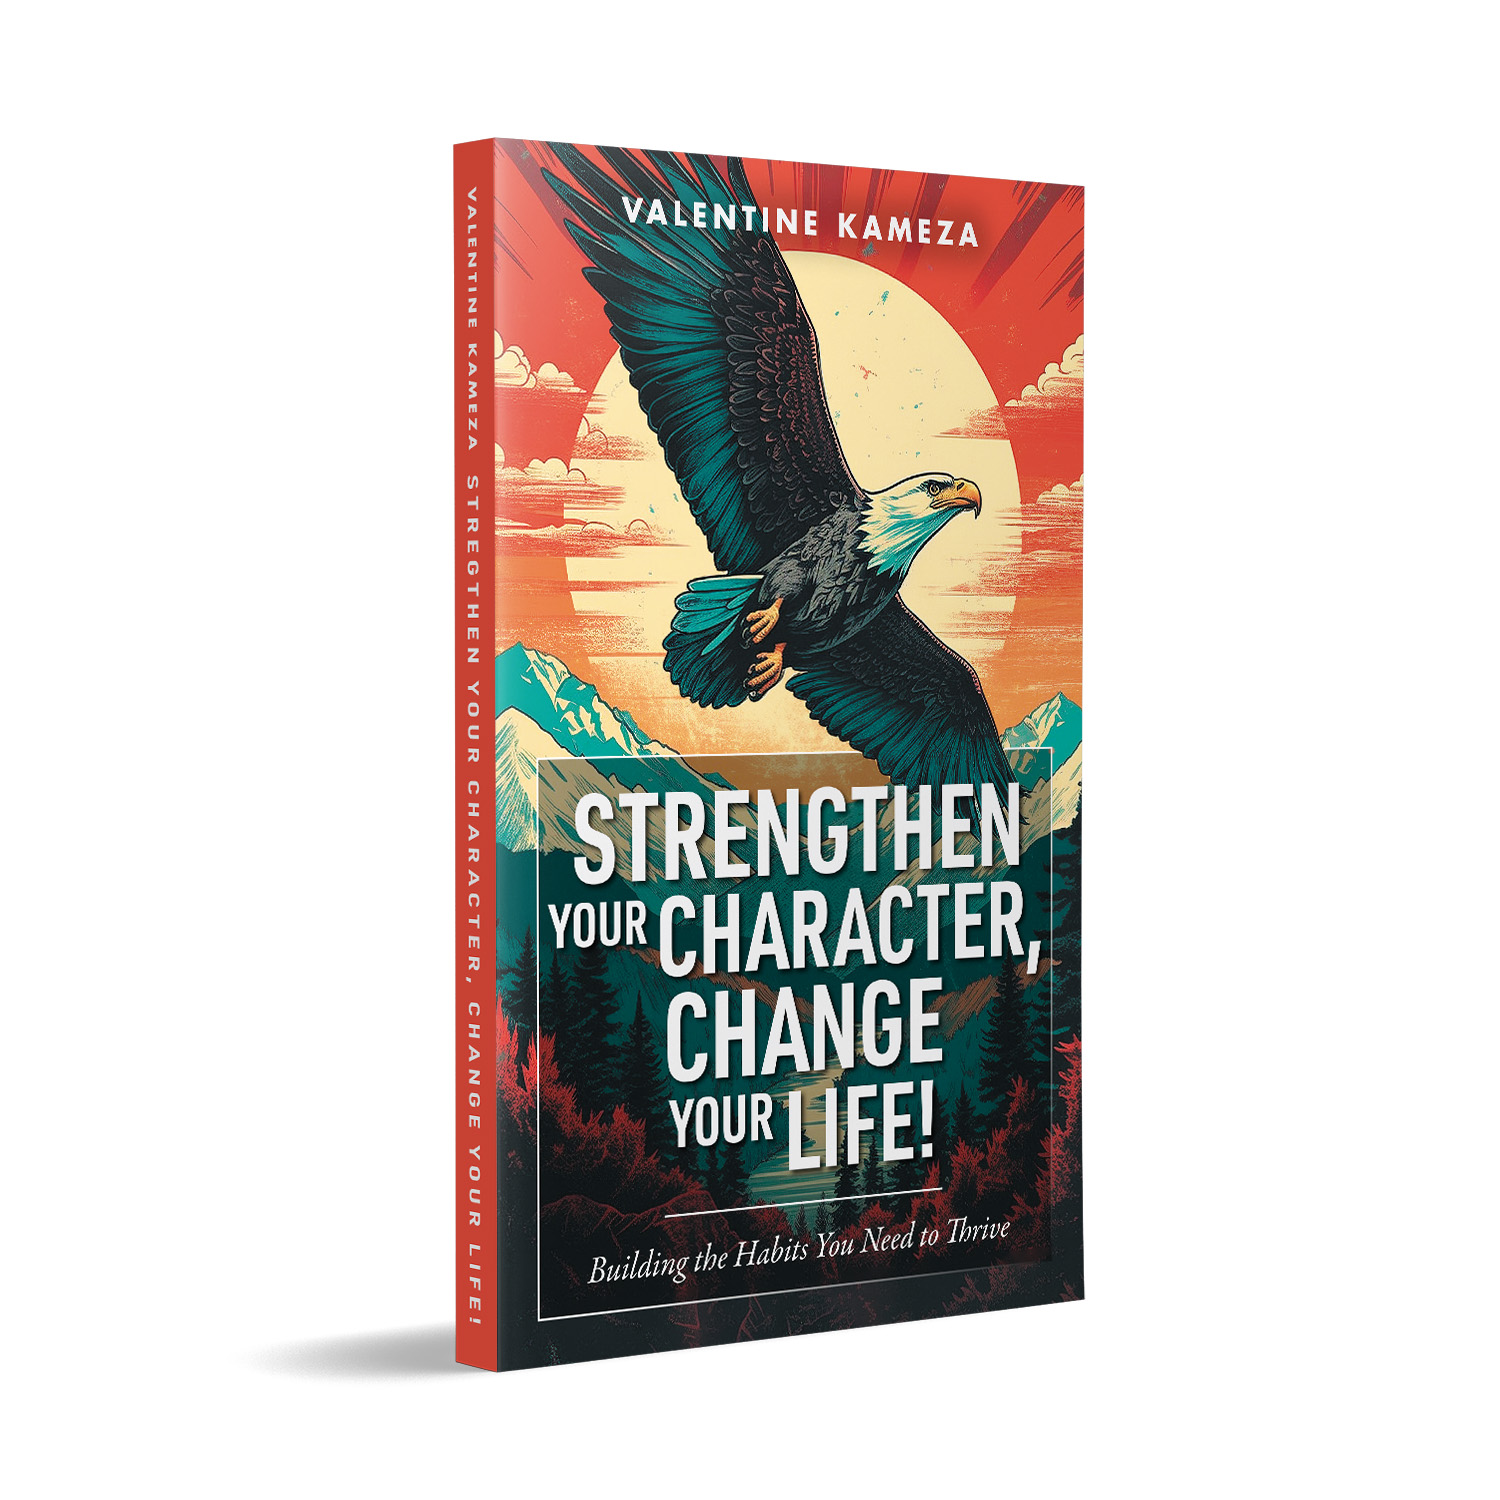 'Strengthen Your Character…" is an uplifting self-help book by Valentine Kameza. The book cover design is by Mark Thomas of Coverness. To learn more about what Mark could do for your book, please visit coverness.com.